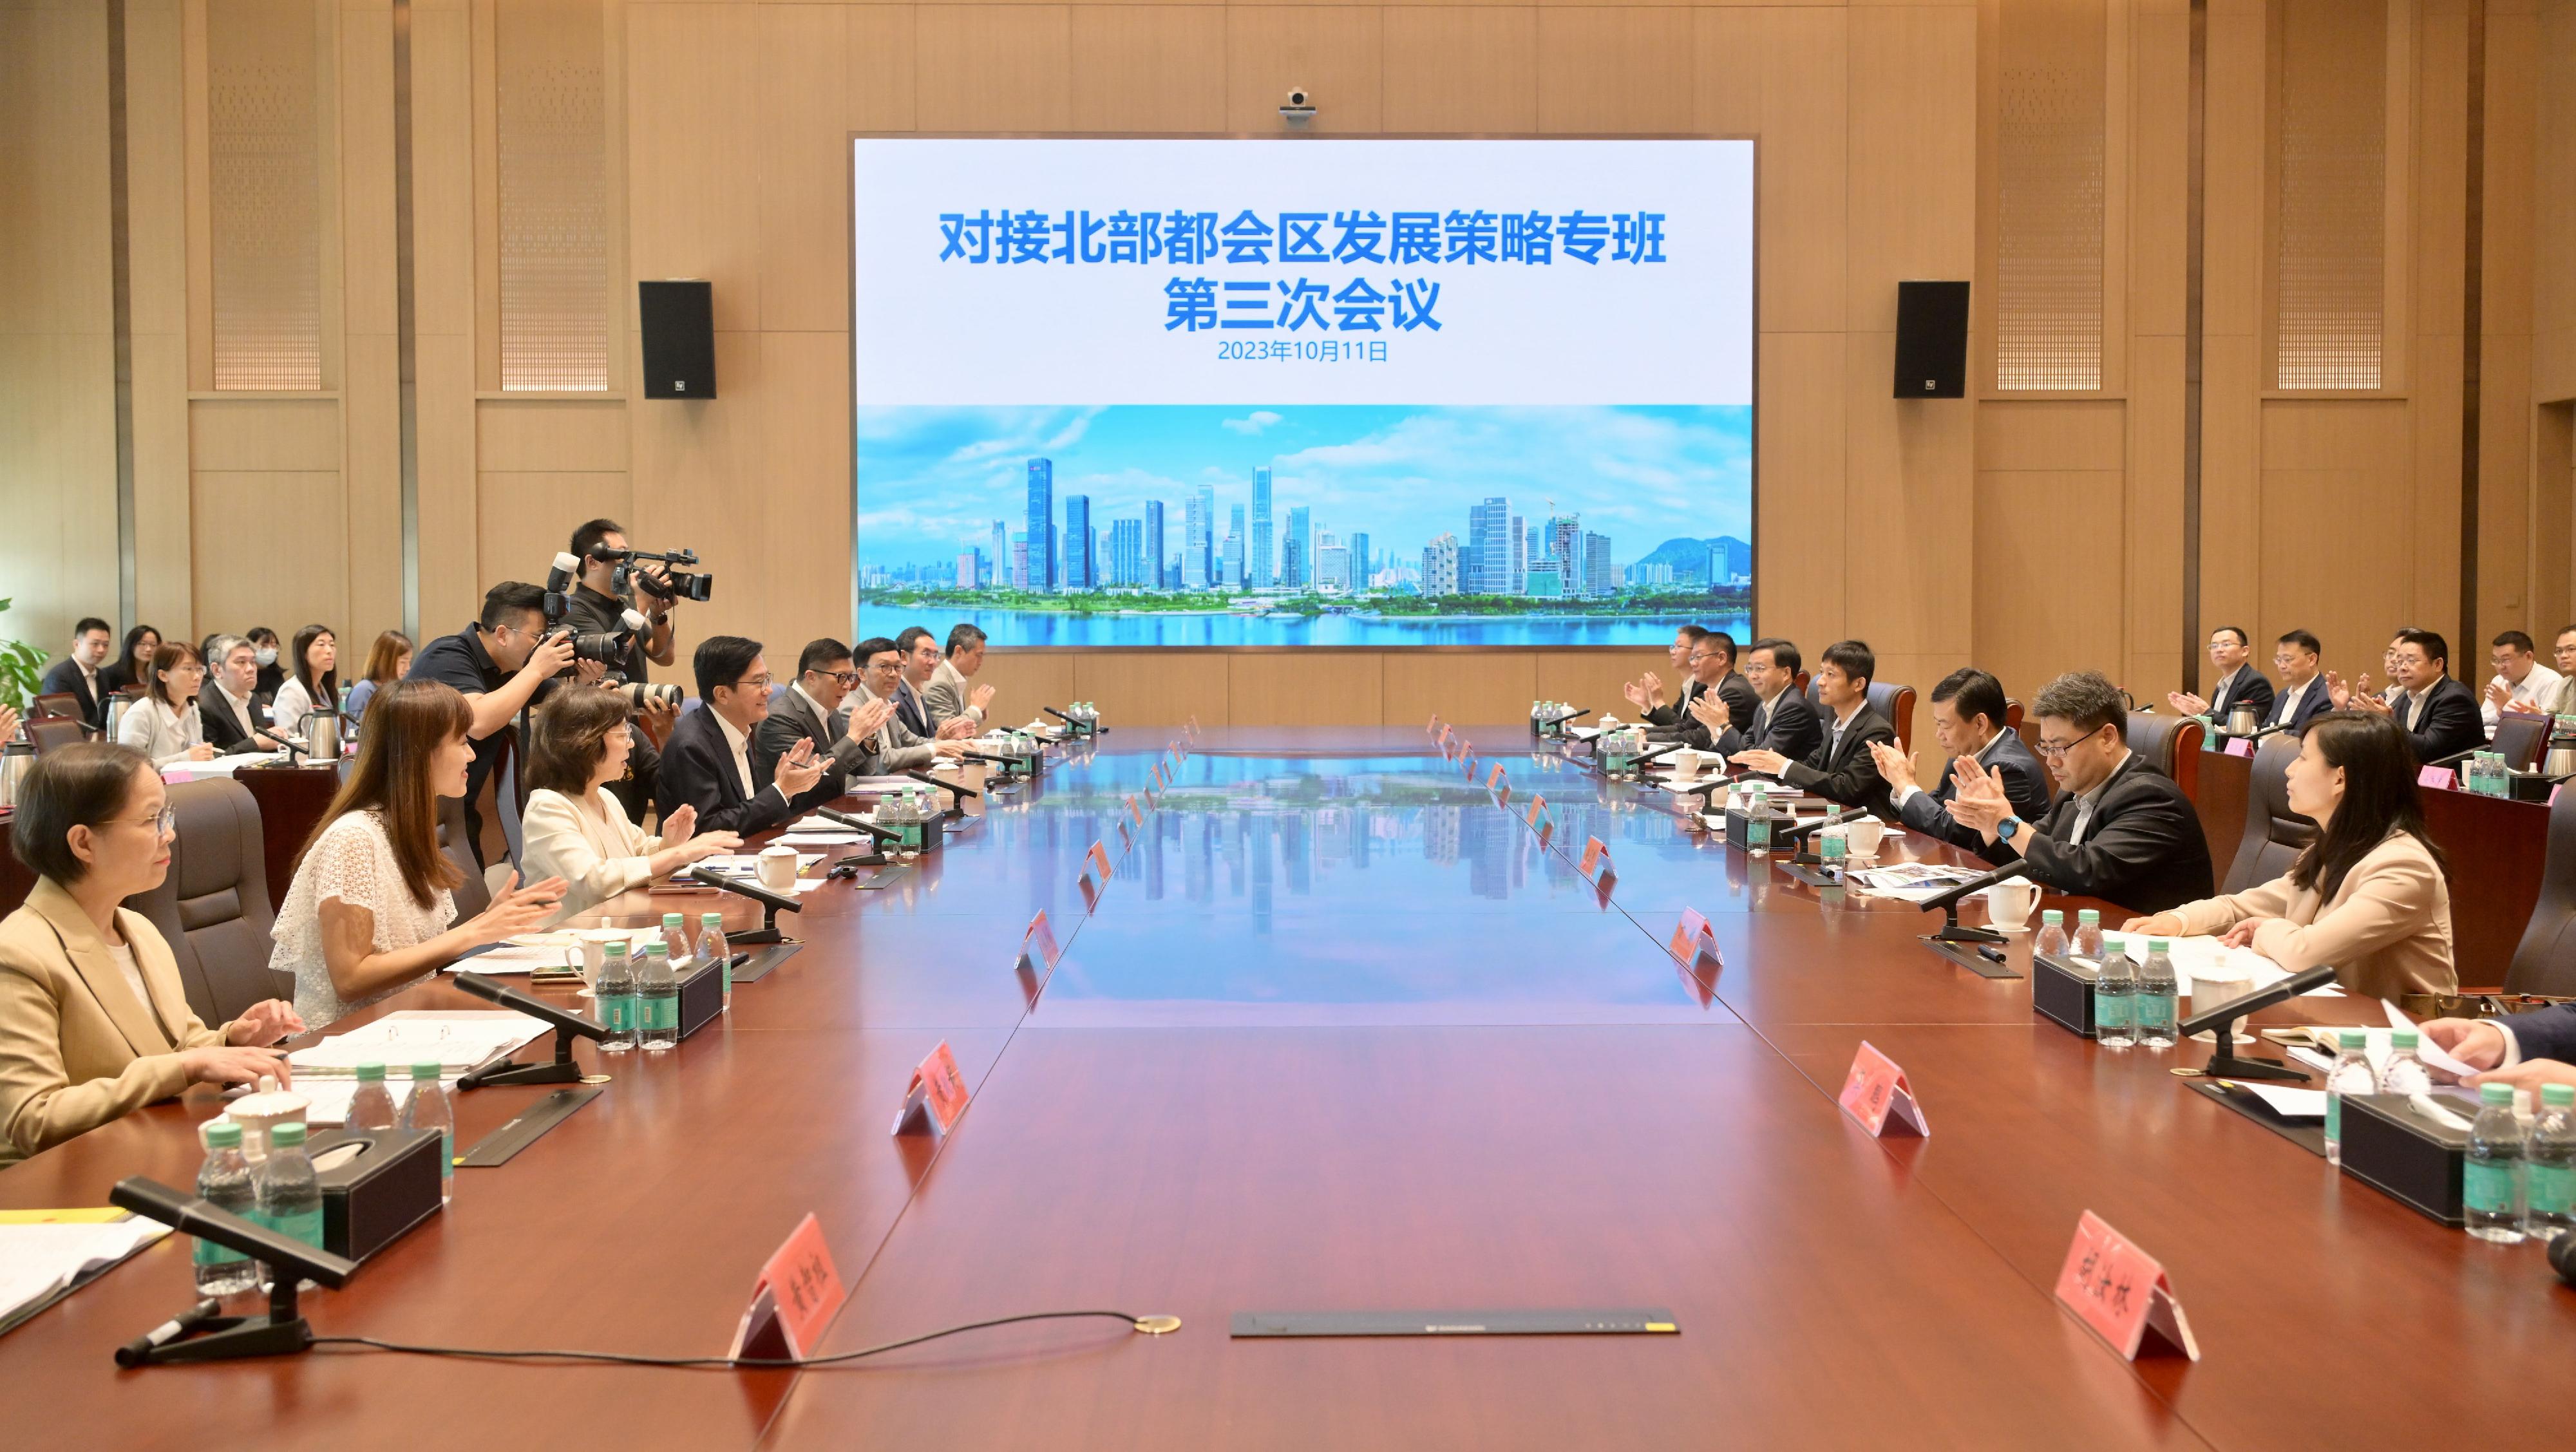 The Deputy Financial Secretary, Mr Michael Wong, and Vice Mayor of the Shenzhen Municipal People's Government Mr Huang Min, leading delegations of the governments of the Hong Kong Special Administrative Region and Shenzhen respectively, held a meeting of the Task Force for Collaboration on the Northern Metropolis Development Strategy in Shenzhen today (October 11). 